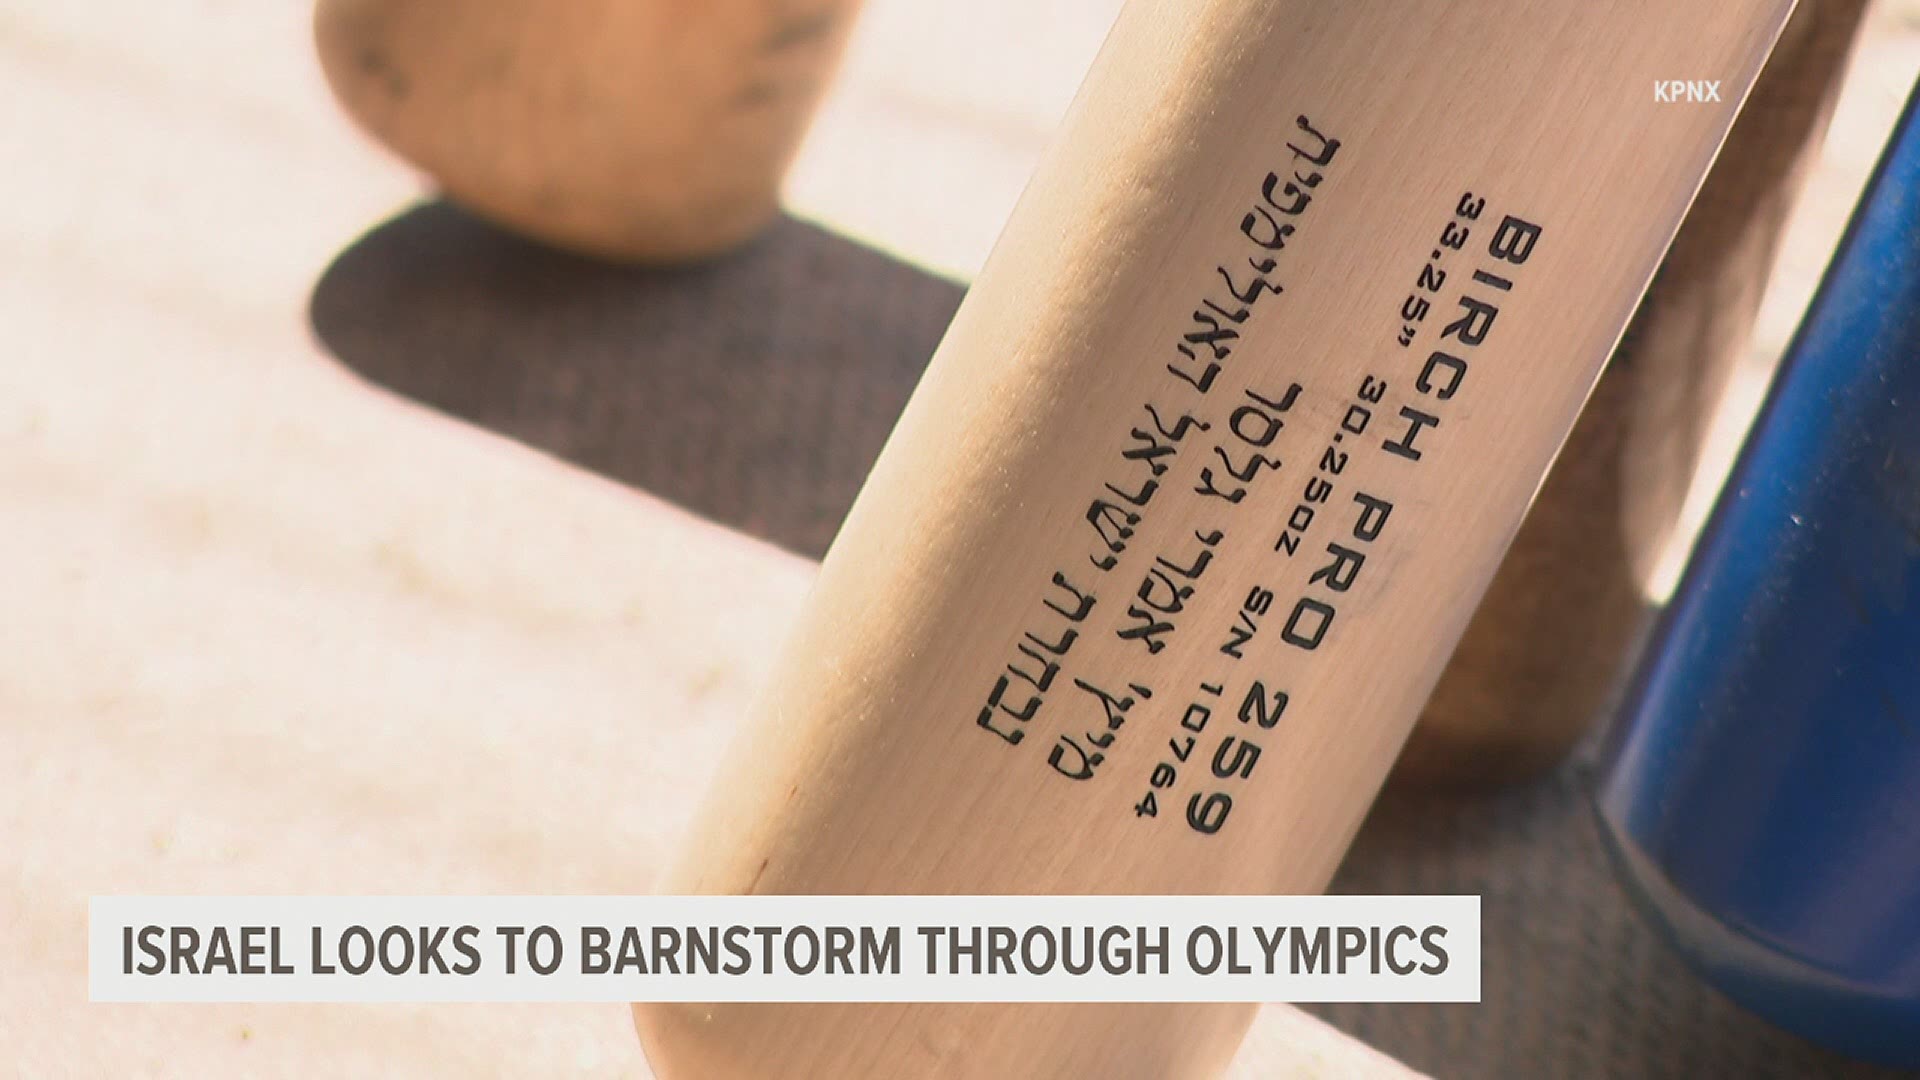 A pair of Barnstormers will play for Israel in the Olympics in Tokyo.